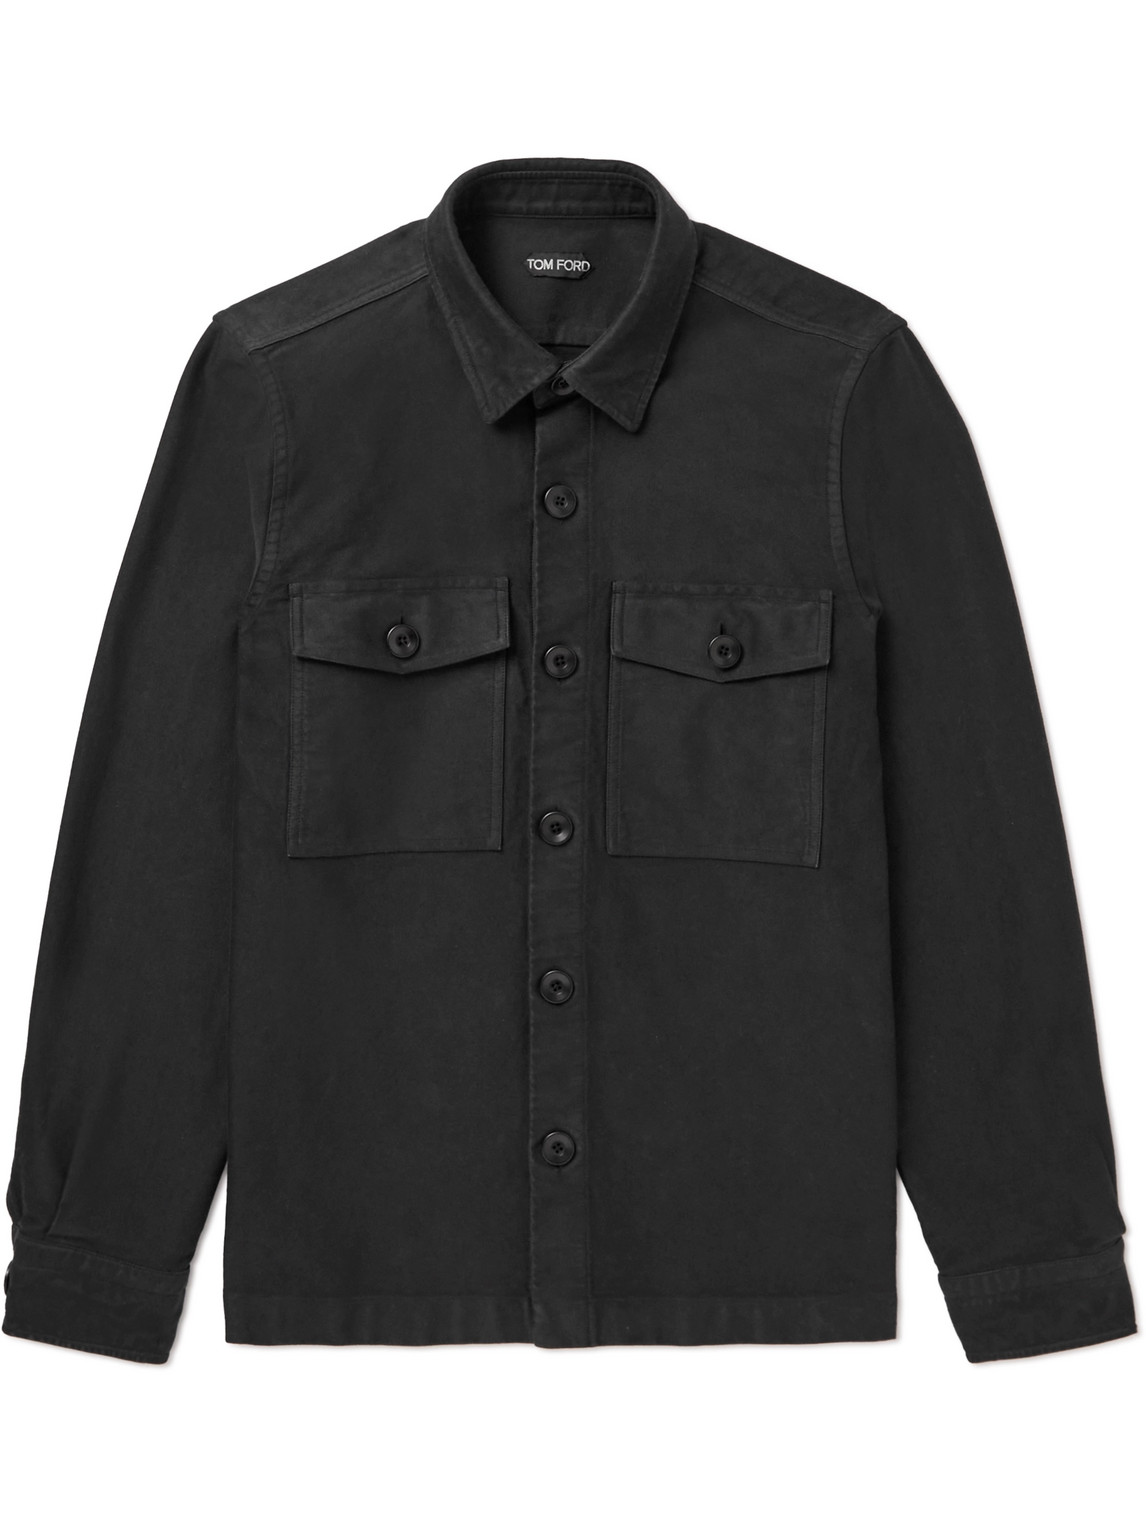 Tom Ford Garment-dyed Cotton Overshirt In Black